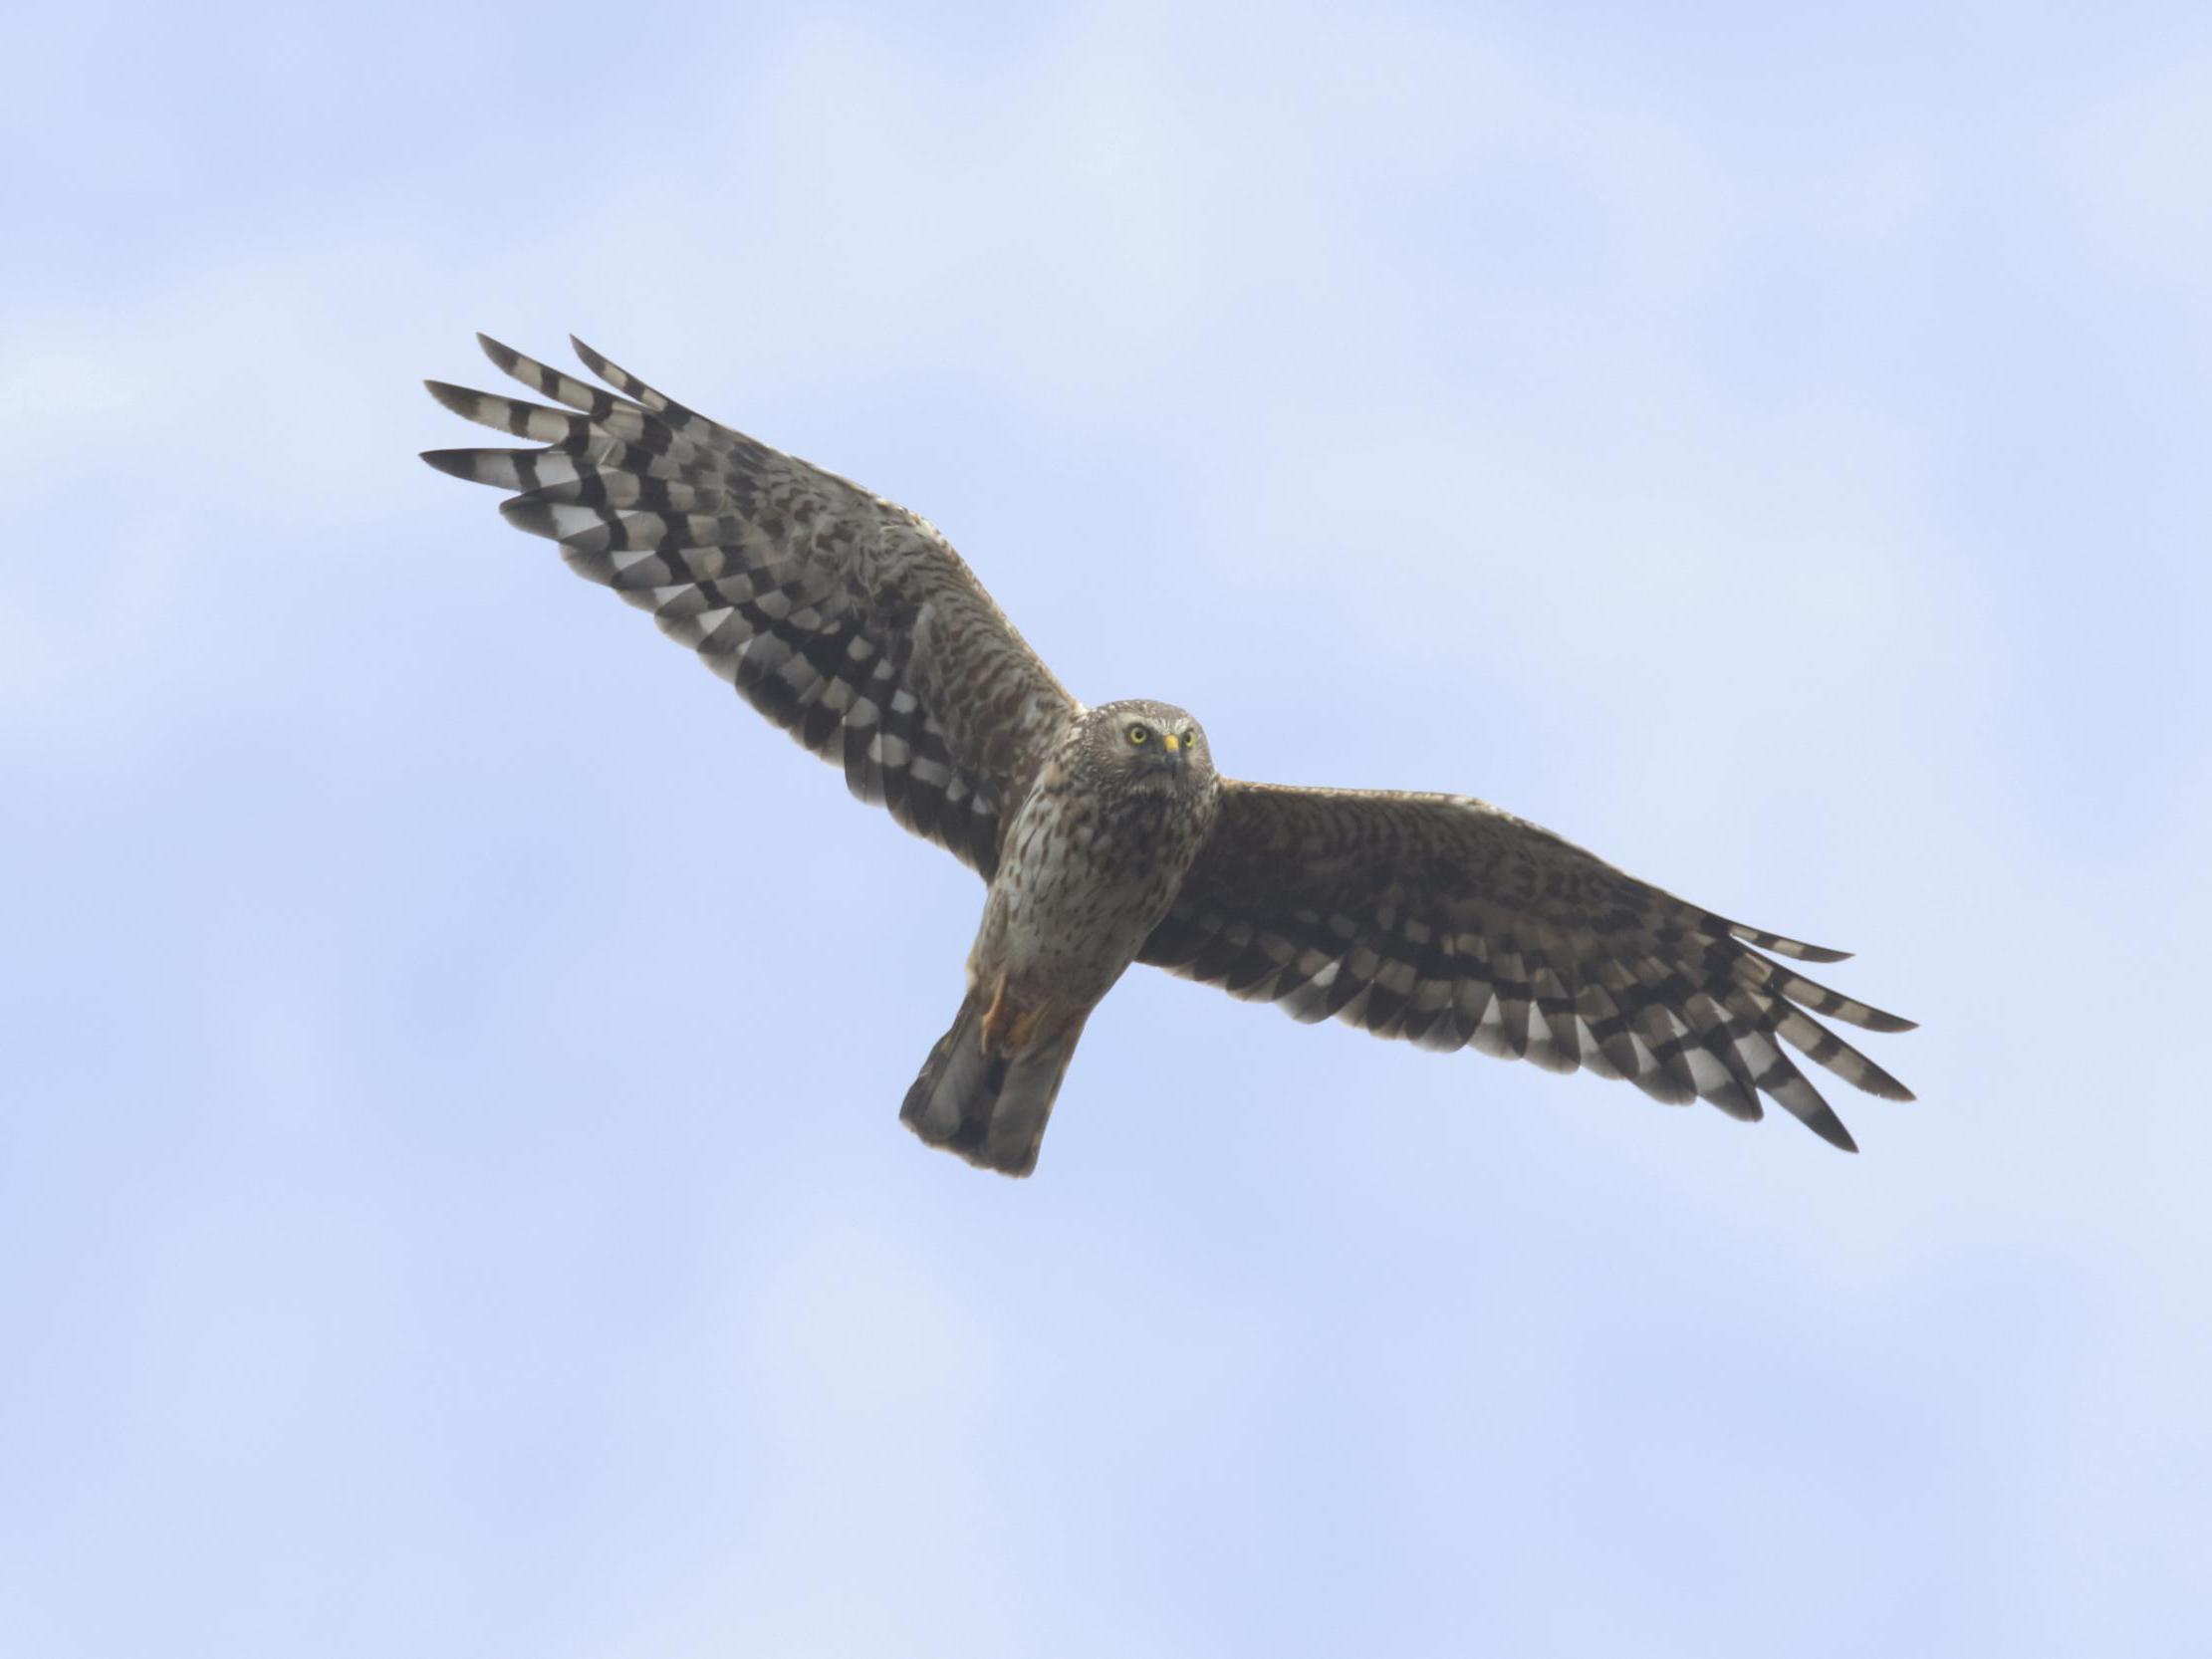 Hen harriers are one of the UK's rarest birds of prey